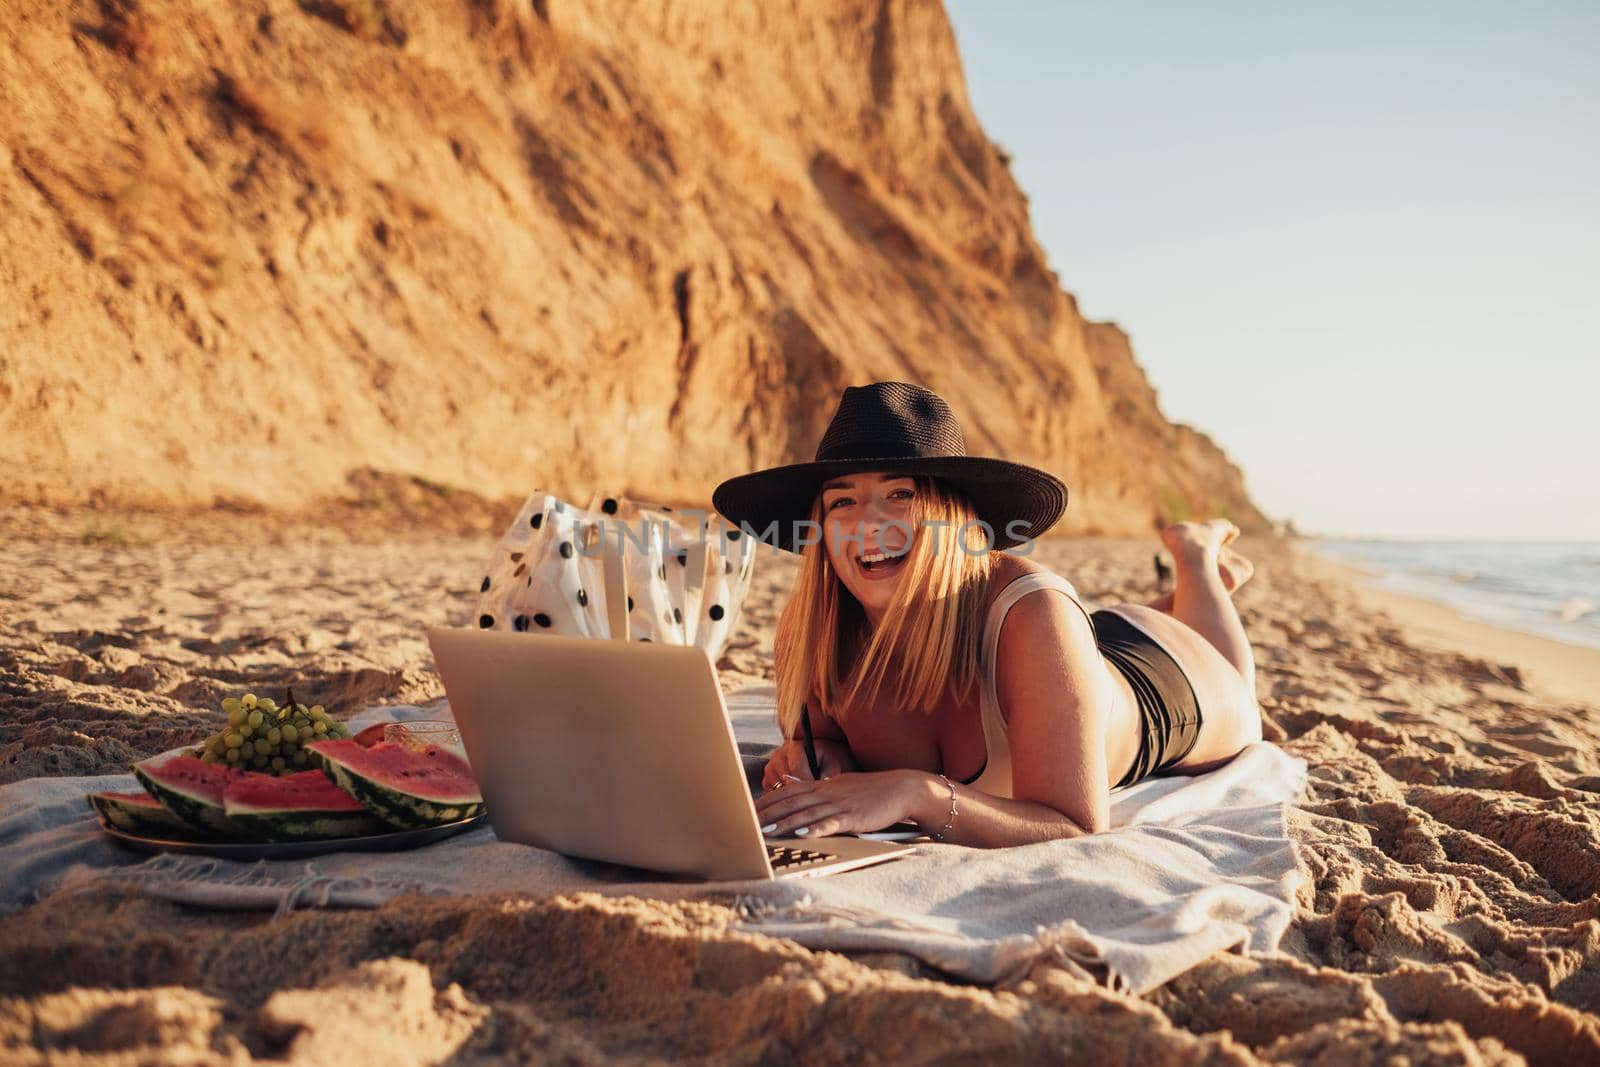 Cheerful Young Woman in Swimsuit and Hat Smiling Into the Camera While Working on Laptop on Vacation by Sea